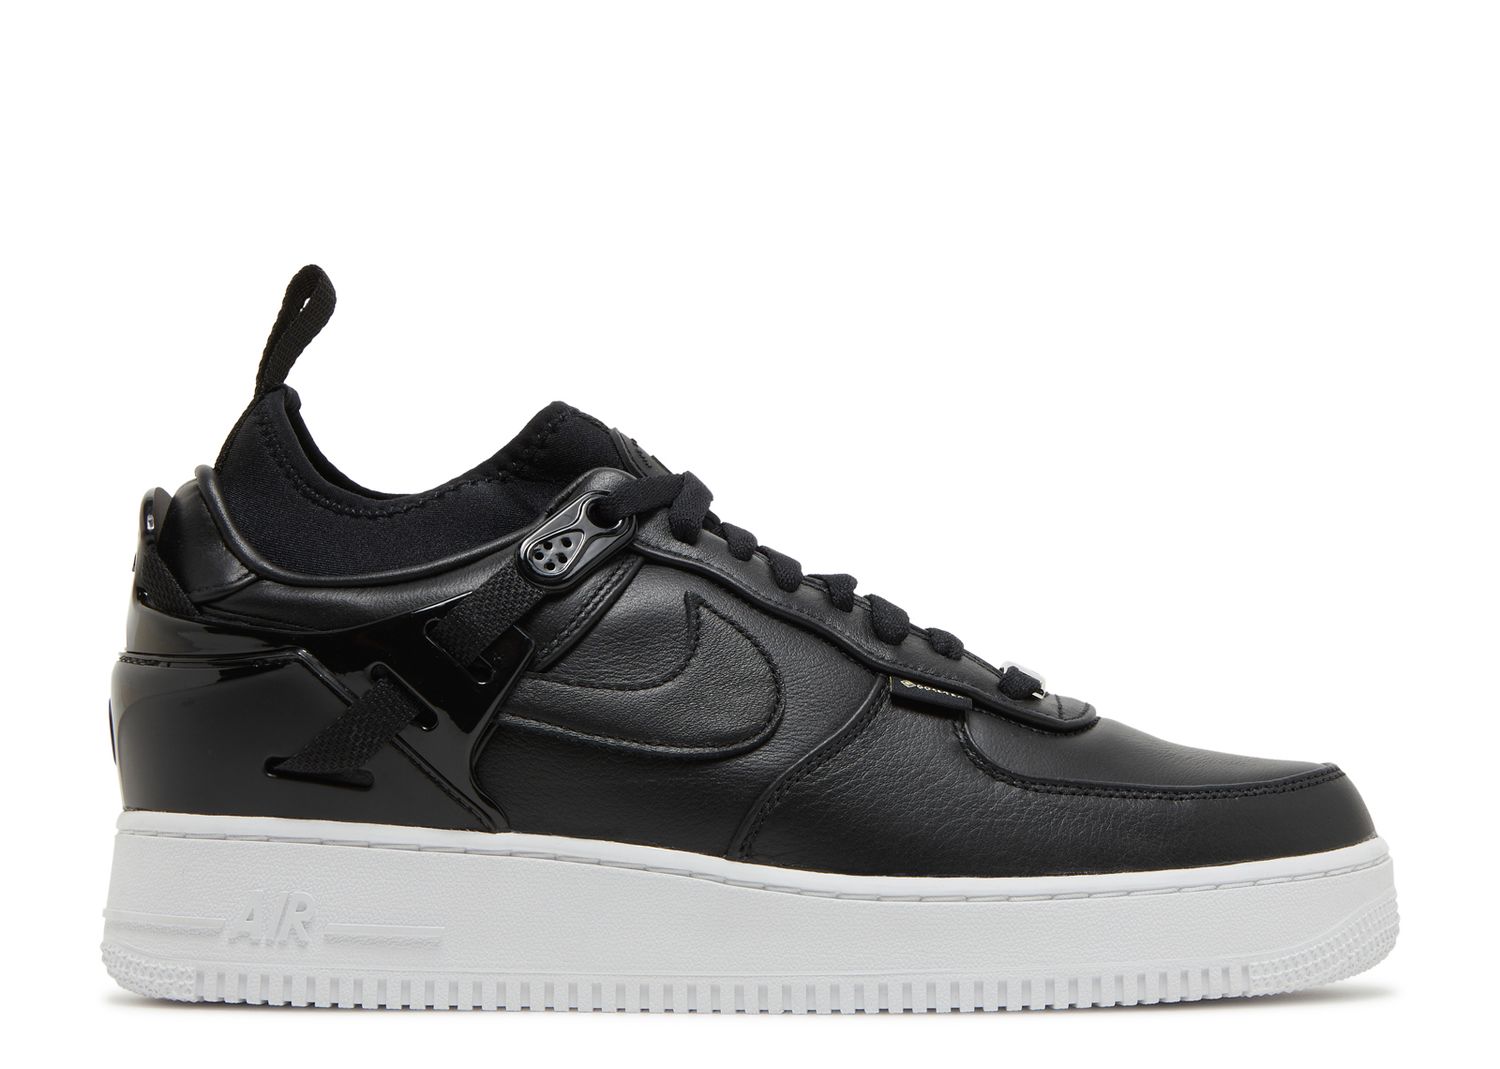 Undercover X Air Force 1 Low SP GORE TEX 'Black' - Nike - DQ7558 002